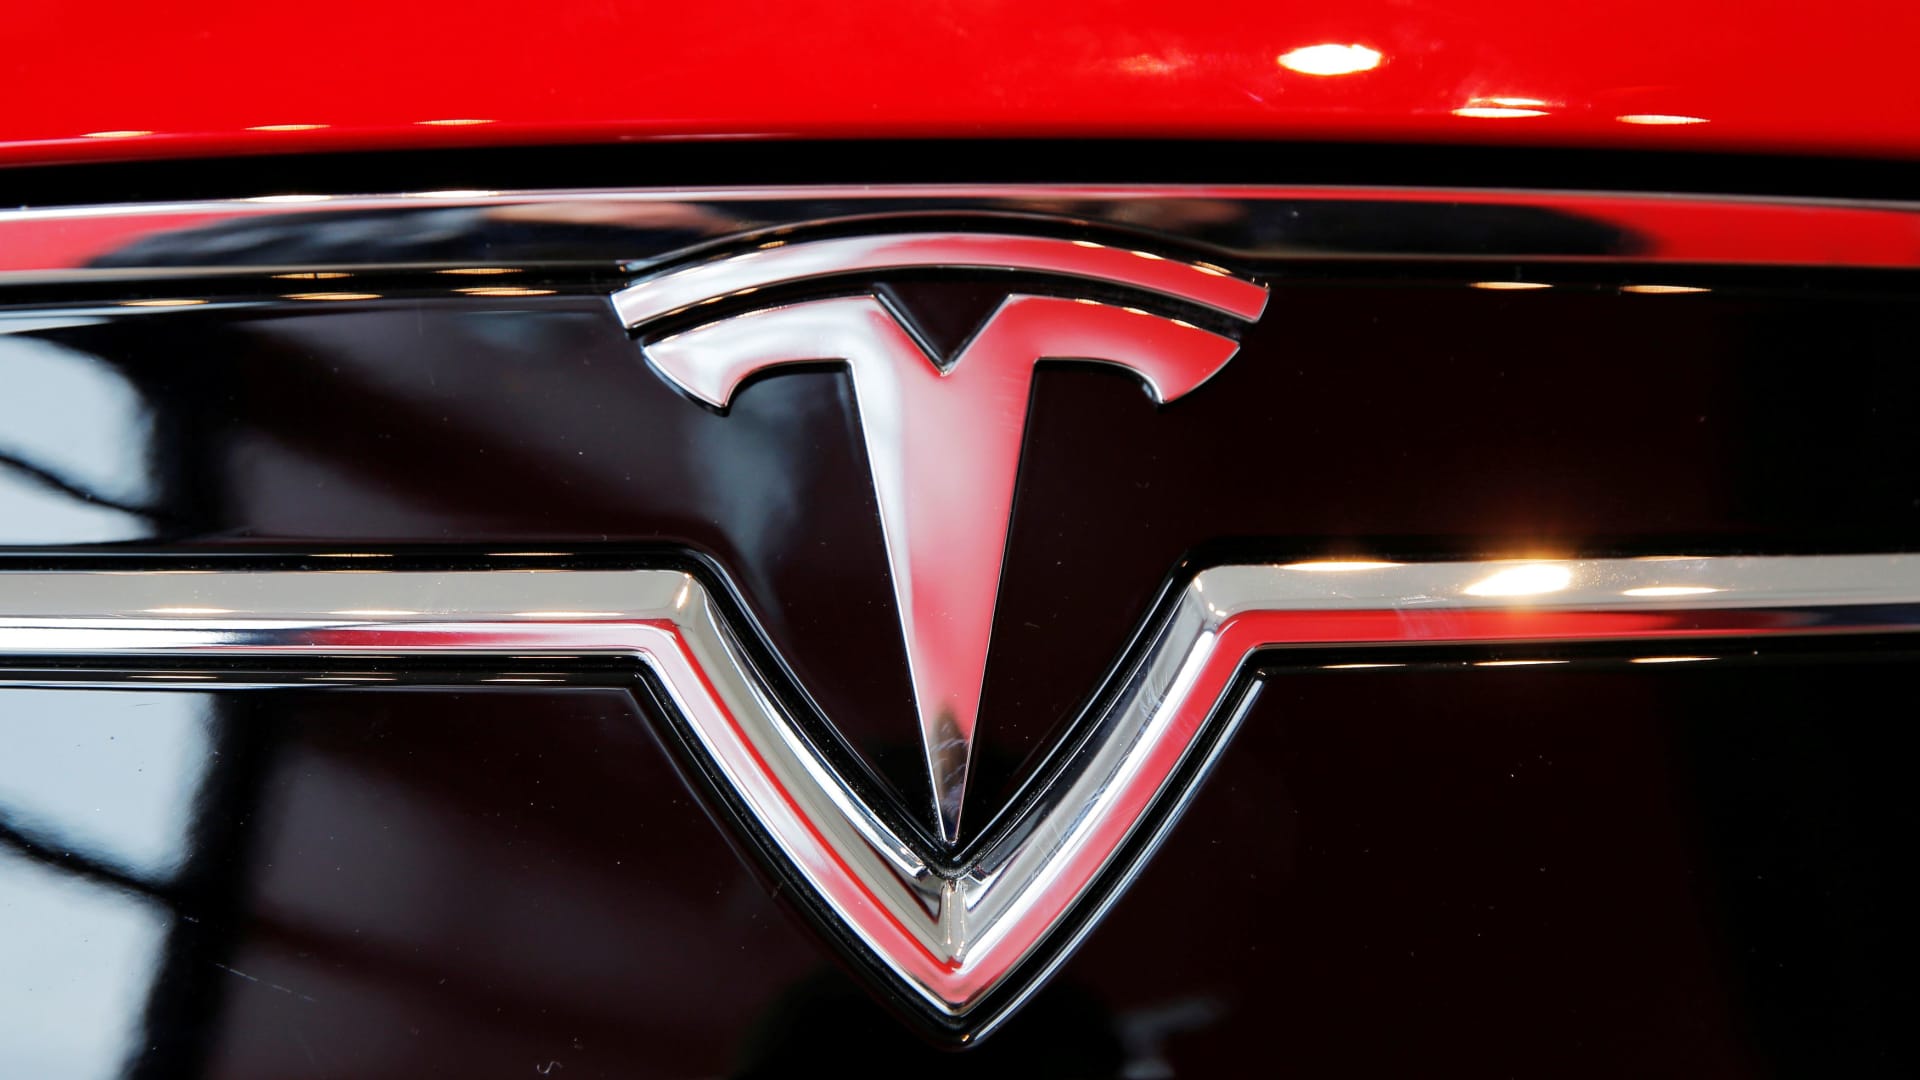 Tesla reported 466140 deliveries for the second quarter and production An abused wife took on Tesla over tracking tech. She lost.